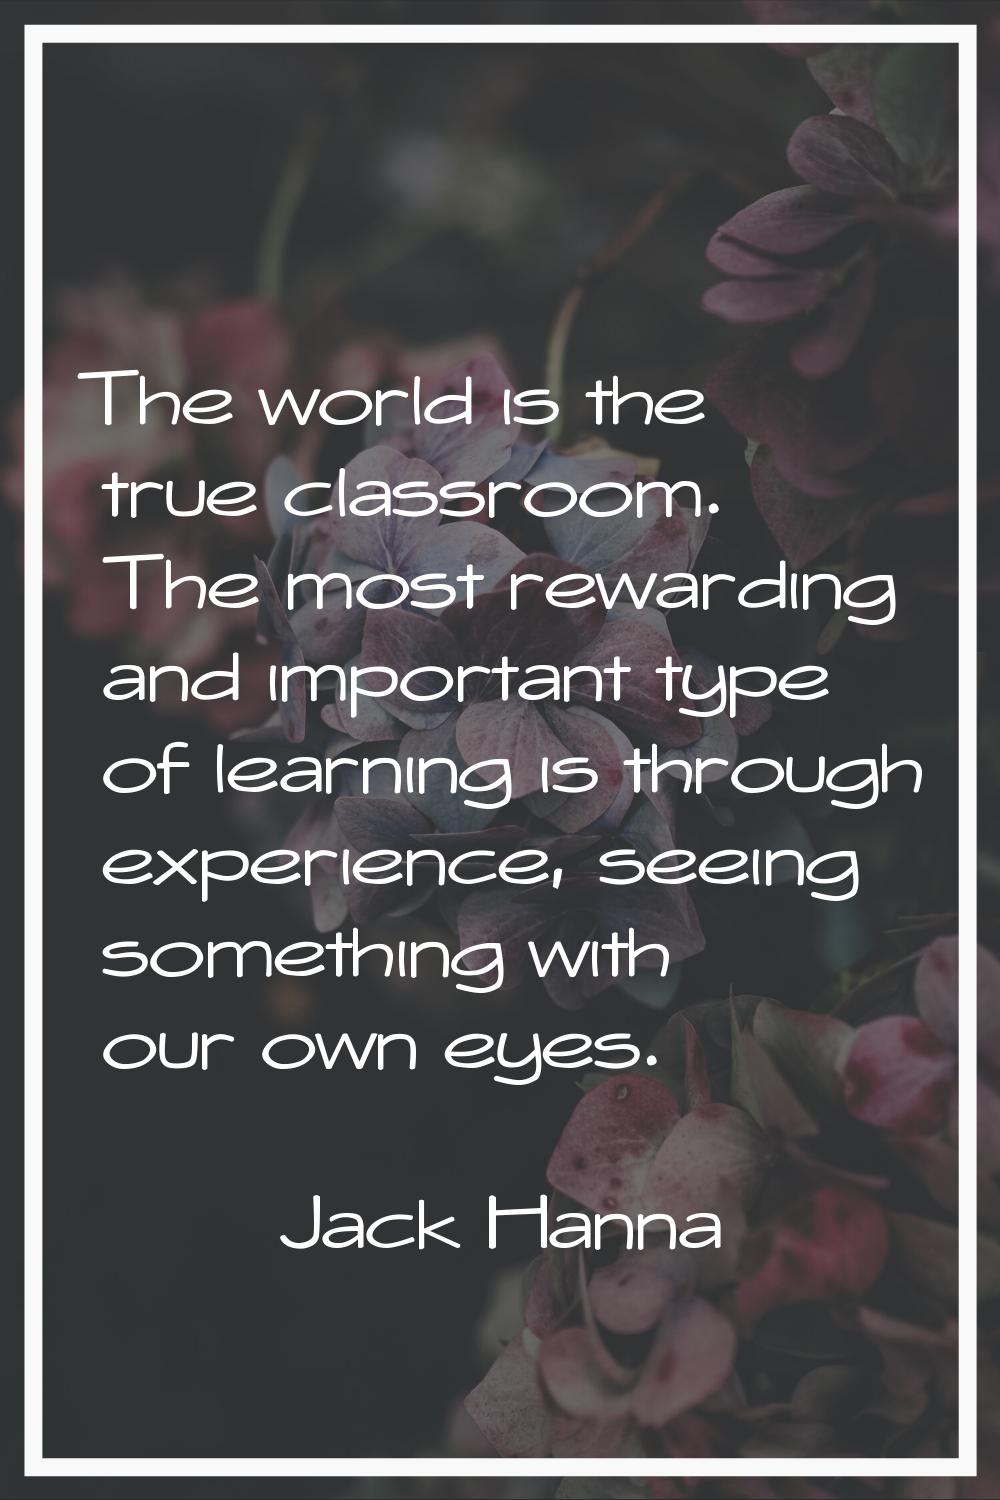 The world is the true classroom. The most rewarding and important type of learning is through exper